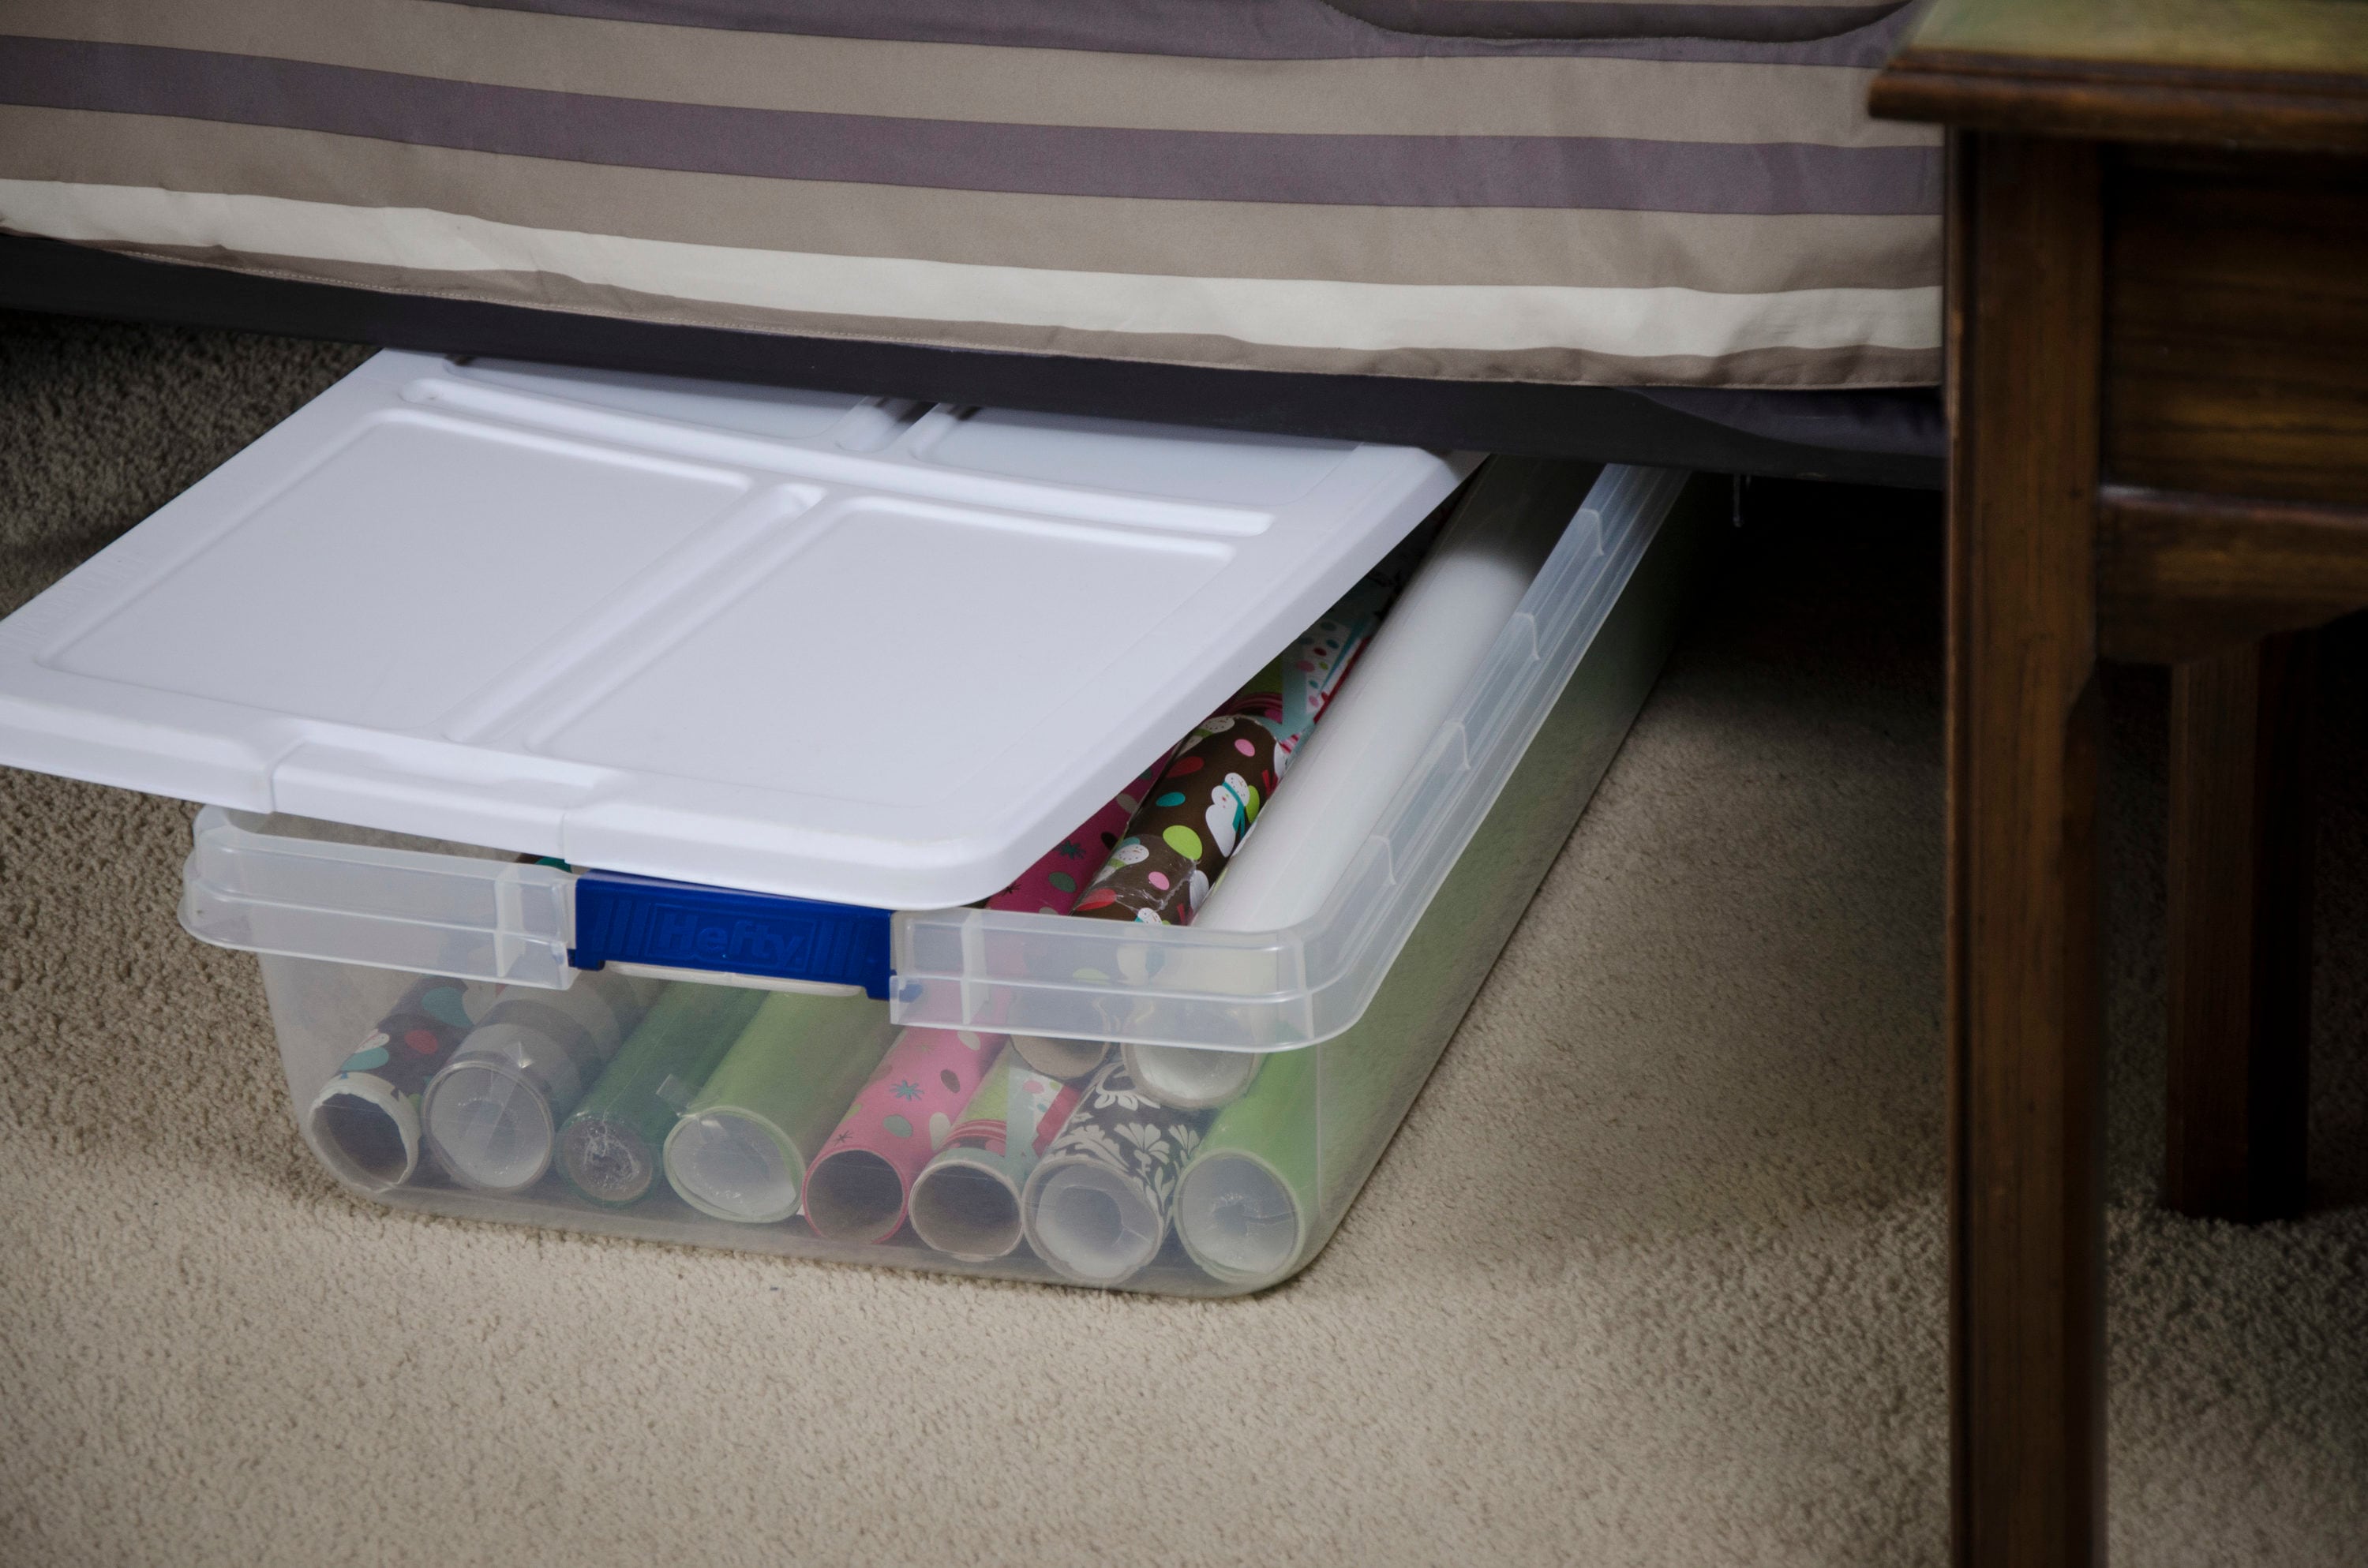 52L Large Plastic Under-bed Storage Containers Under Bed Storage